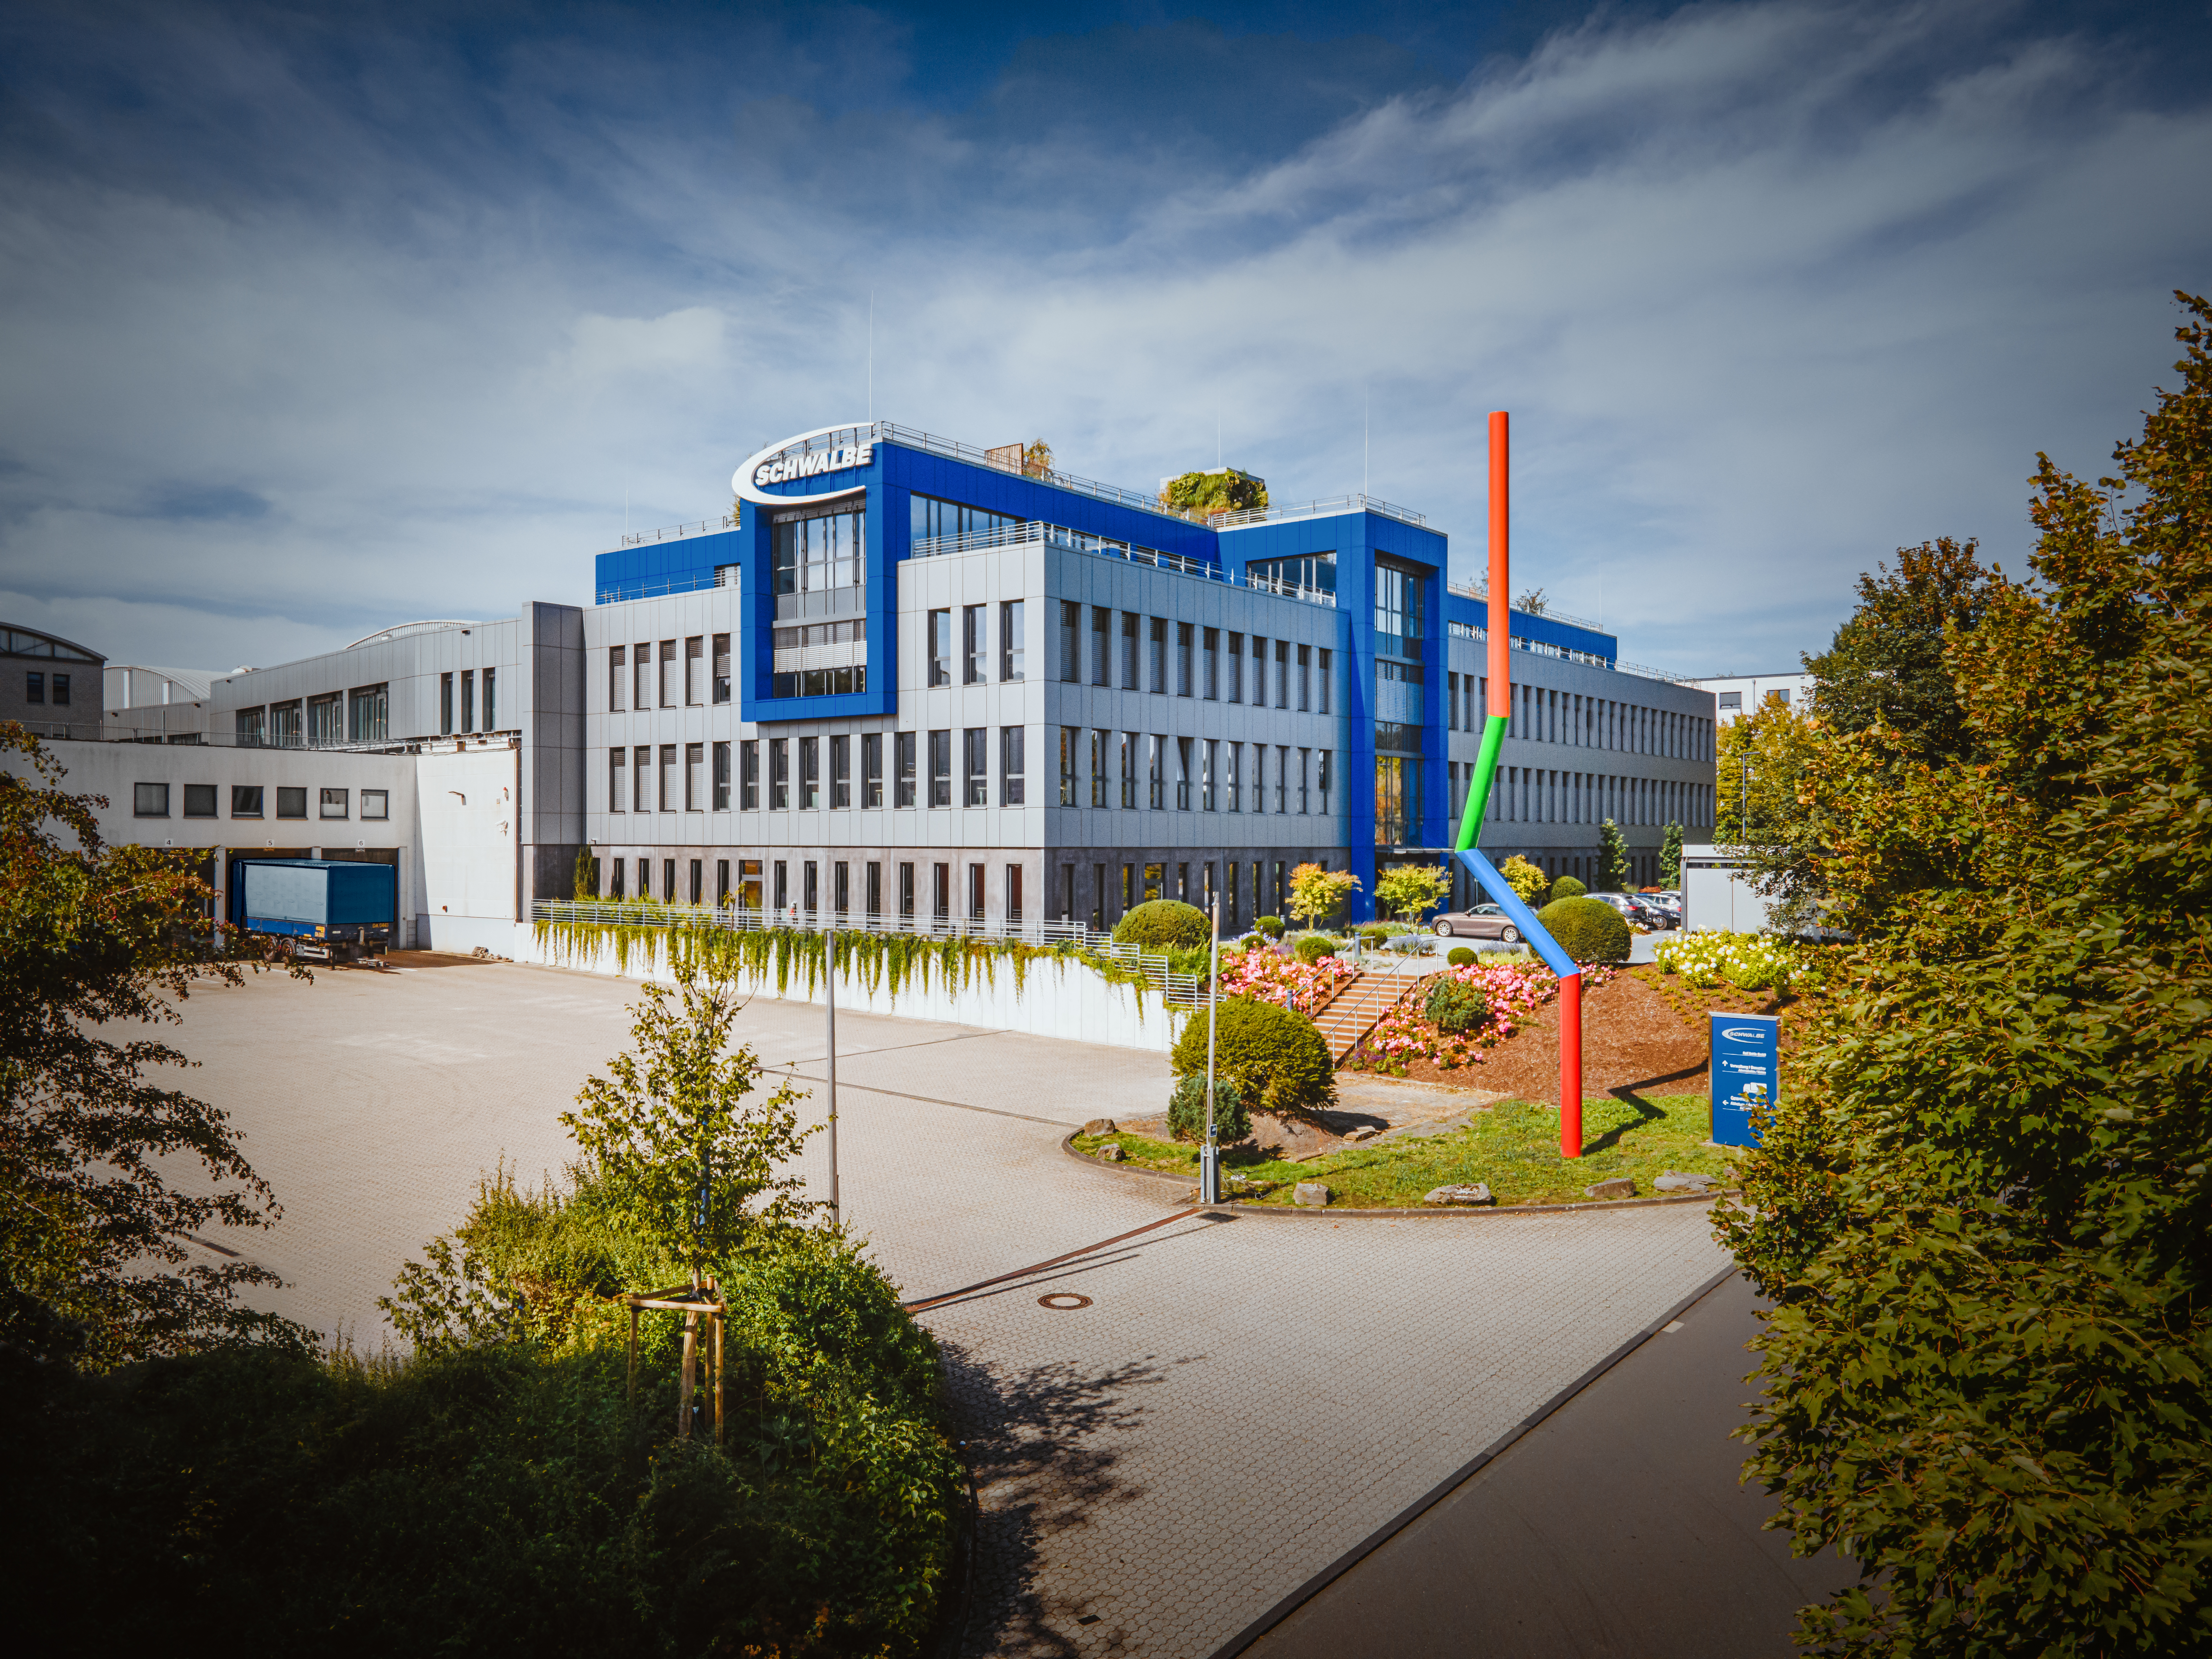 SCHWALBE ACHIEVES NEW RECORD SALES IN ANNIVERSARY YEAR